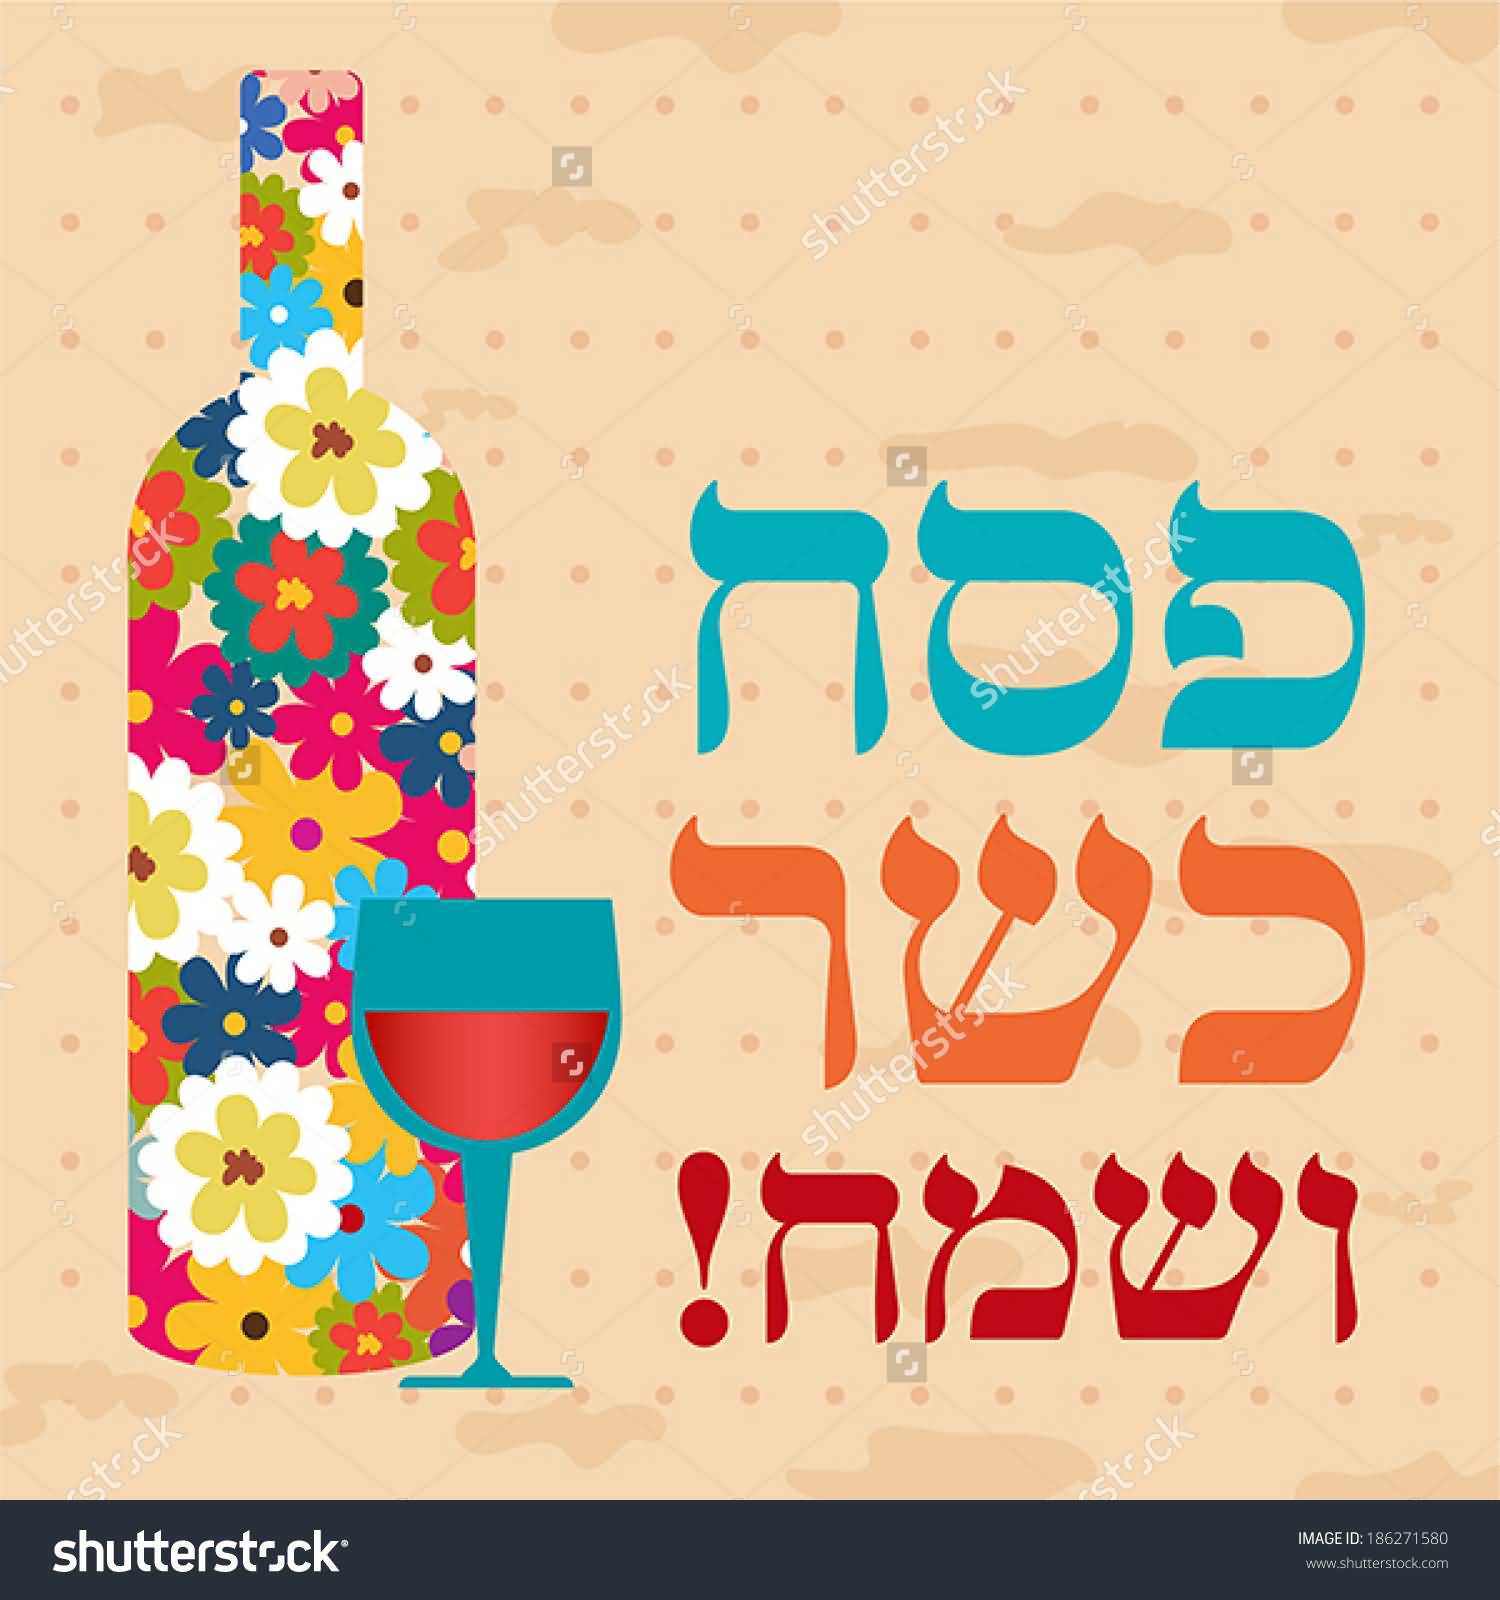 Happy Passover Wishes With Hebrew Text